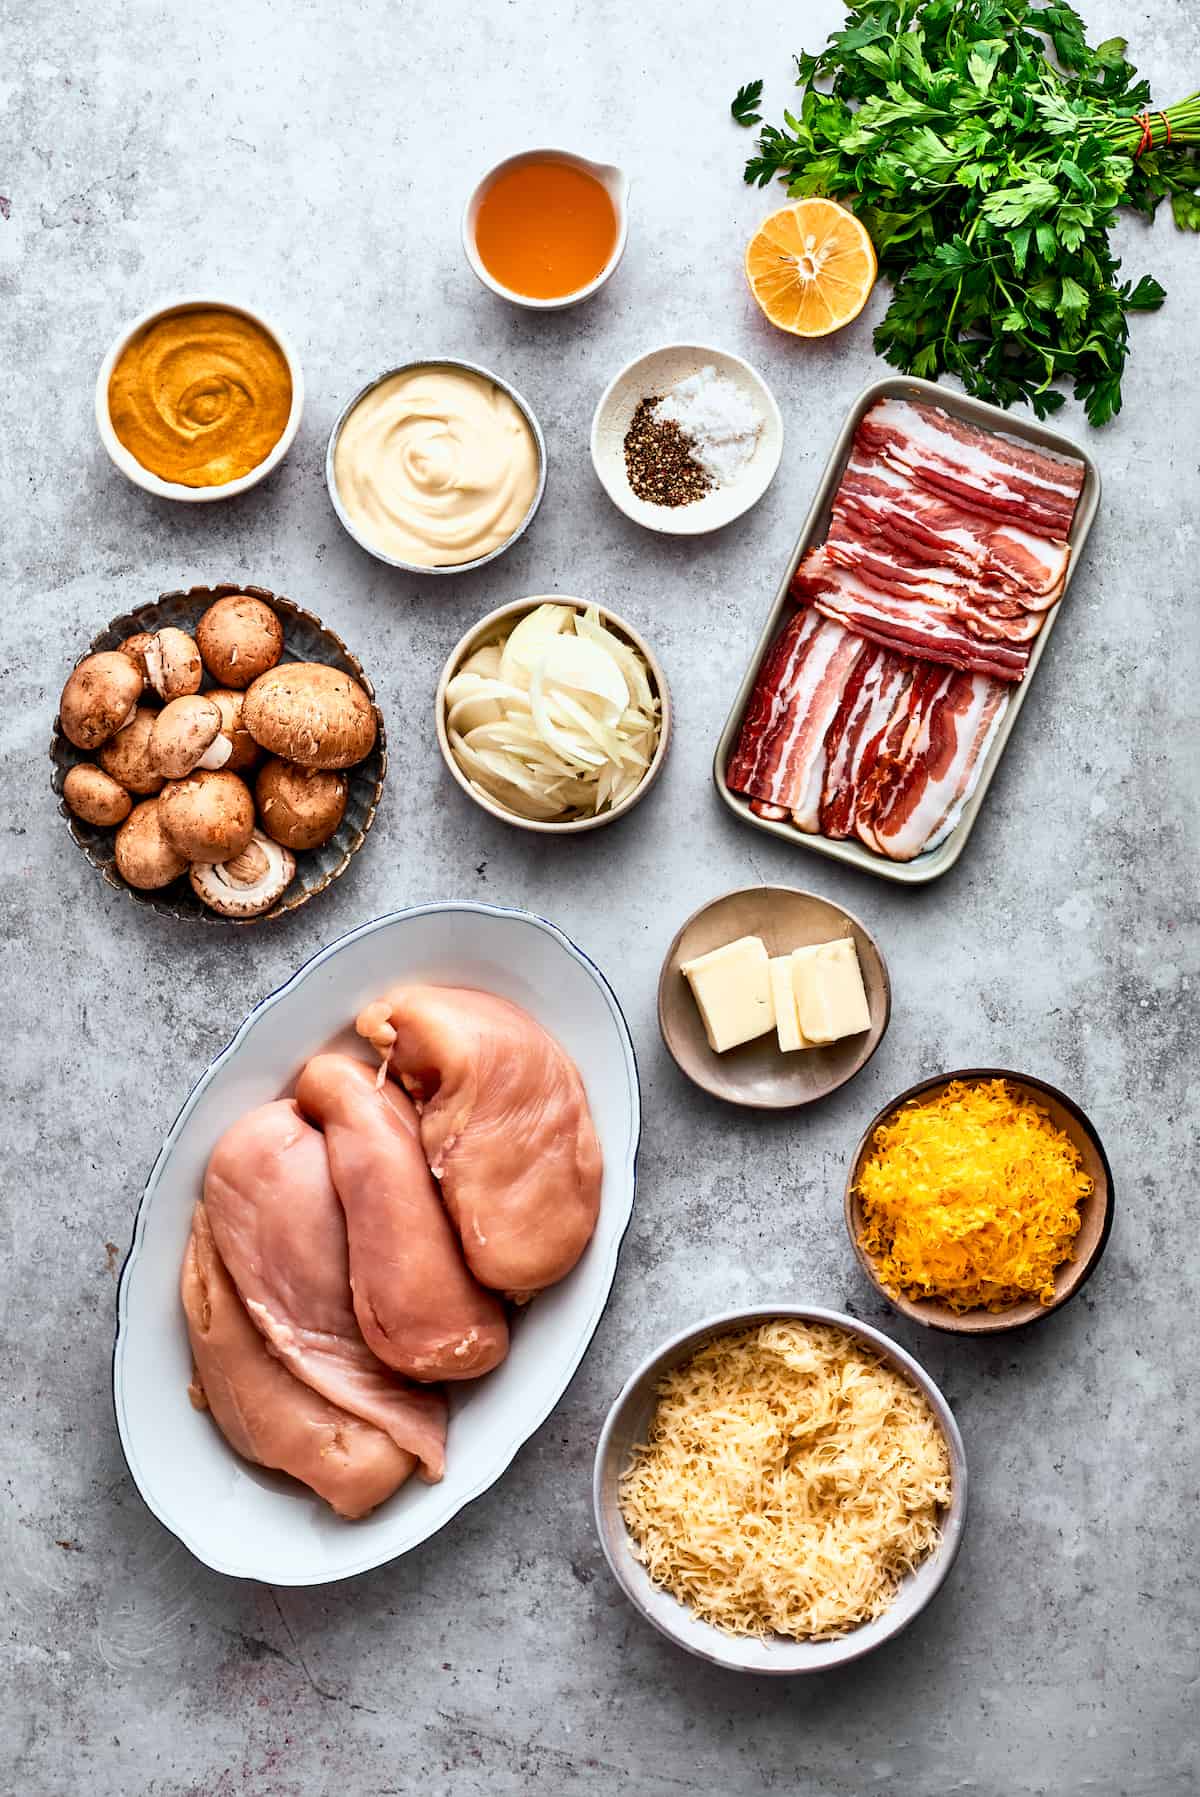 The ingredients to make Alice Springs chicken are shown portioned out: chicken, mushrooms, honey, mayo, mustard, garlic, onion, butter, bacon, salt and pepper, cheddar and Jack cheeses.